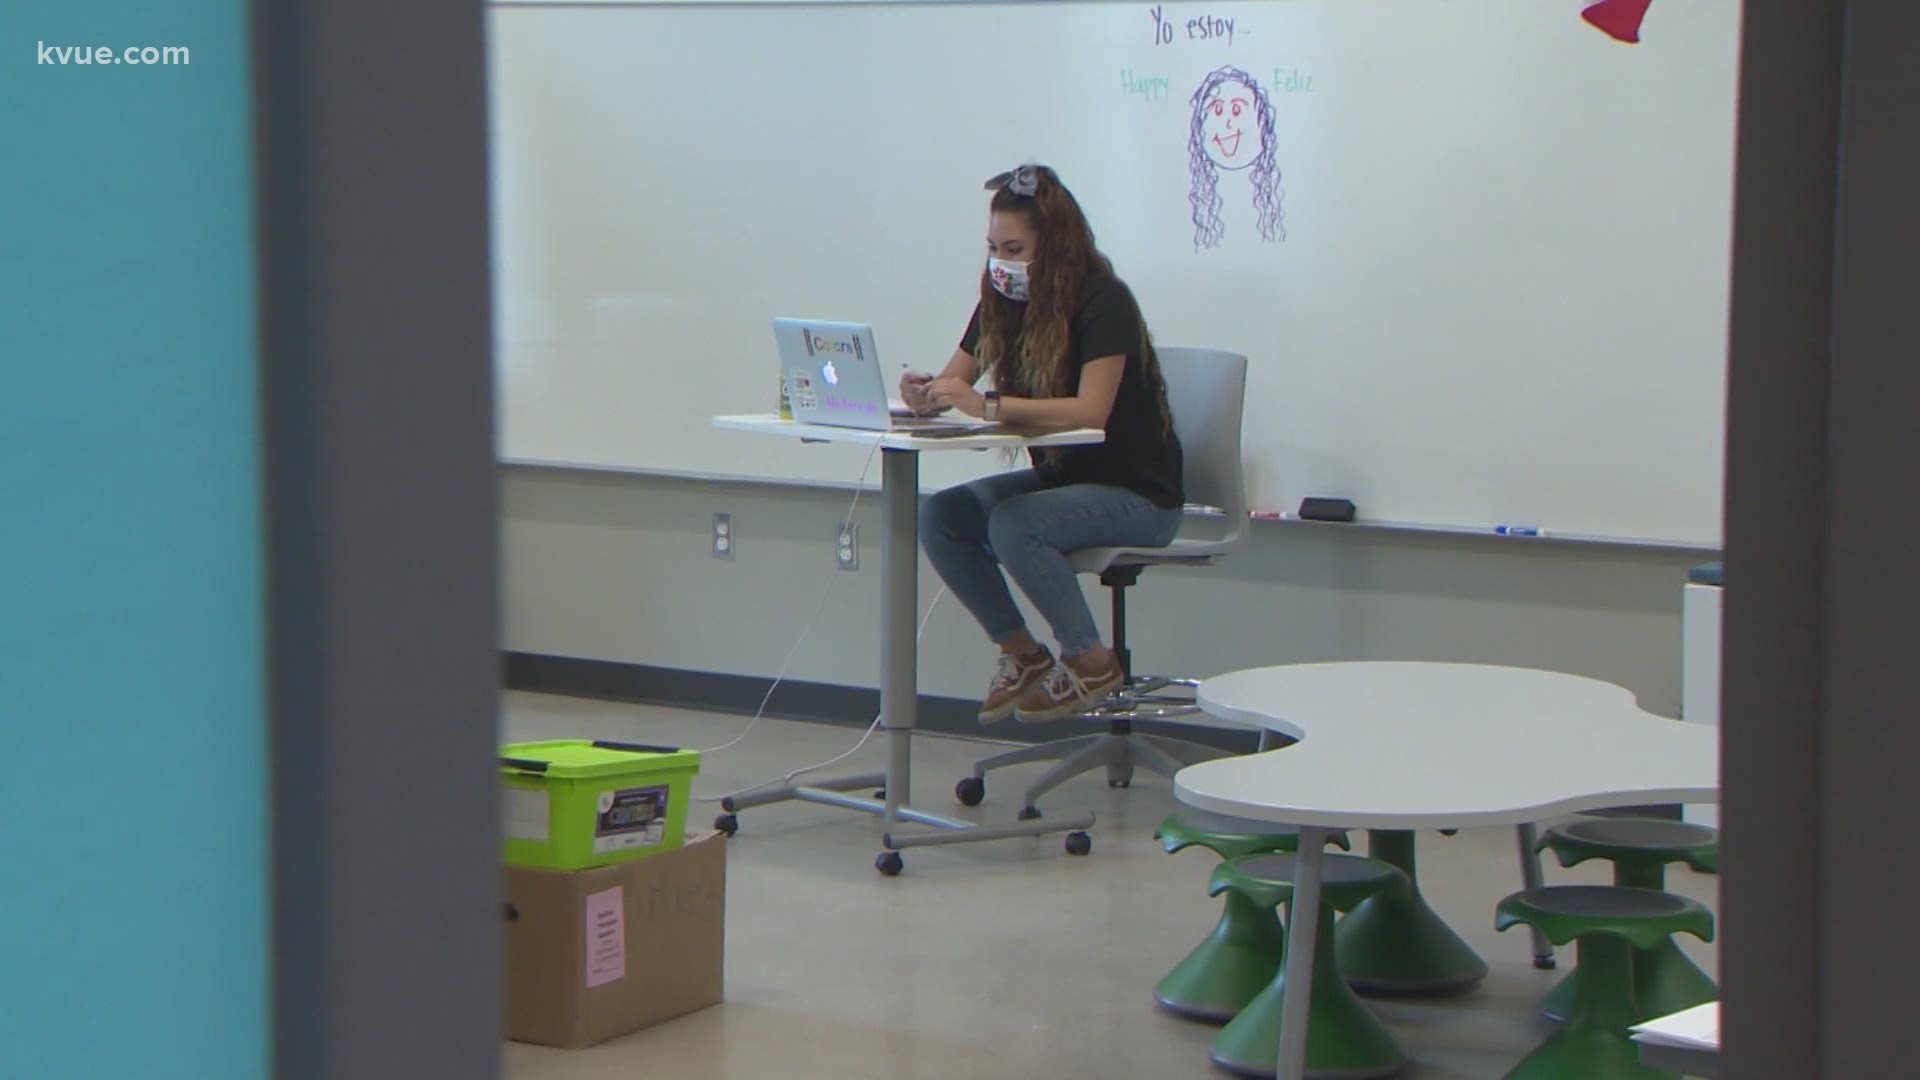 At Austin ISD it's virtual only, but some teachers are still showing up to their classrooms anyways.